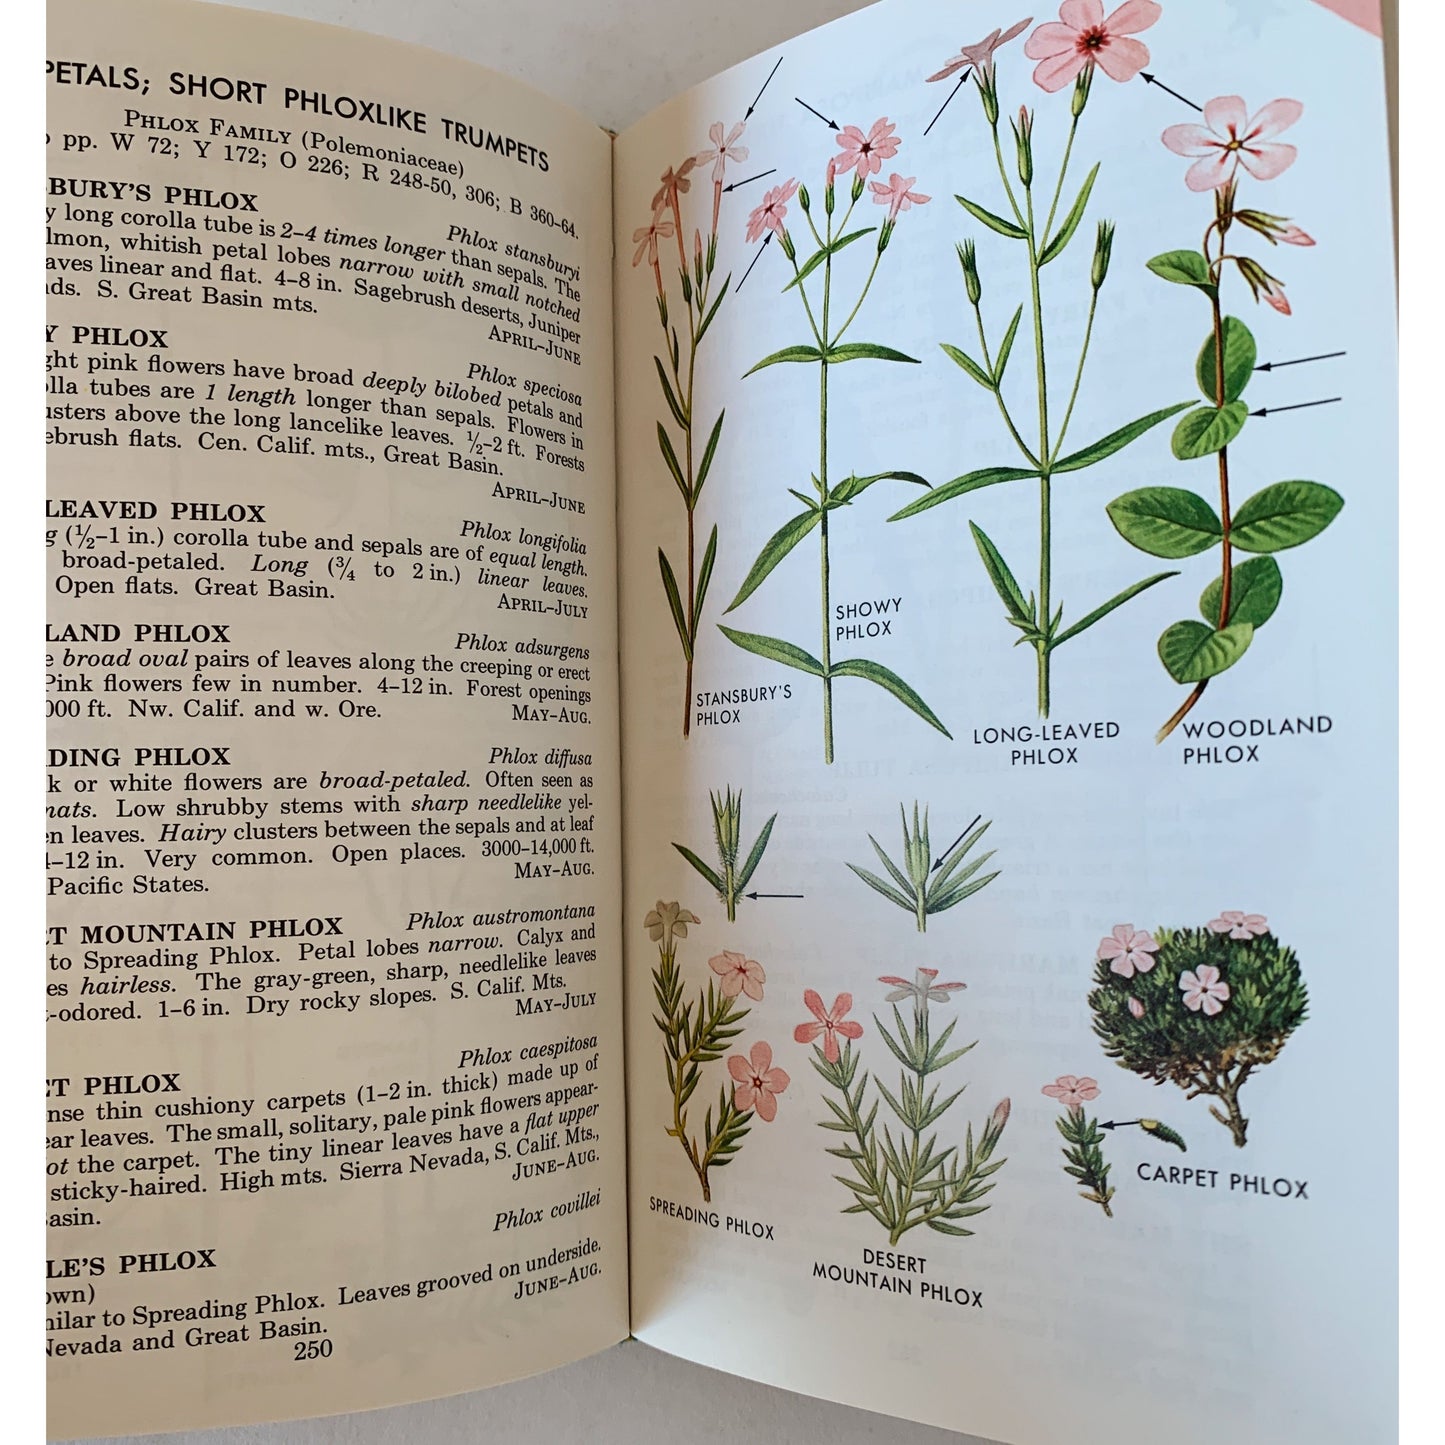 A Field Guide to Pacific States Wildflowers, 1976, Roger Tory Peterson, Hardcover